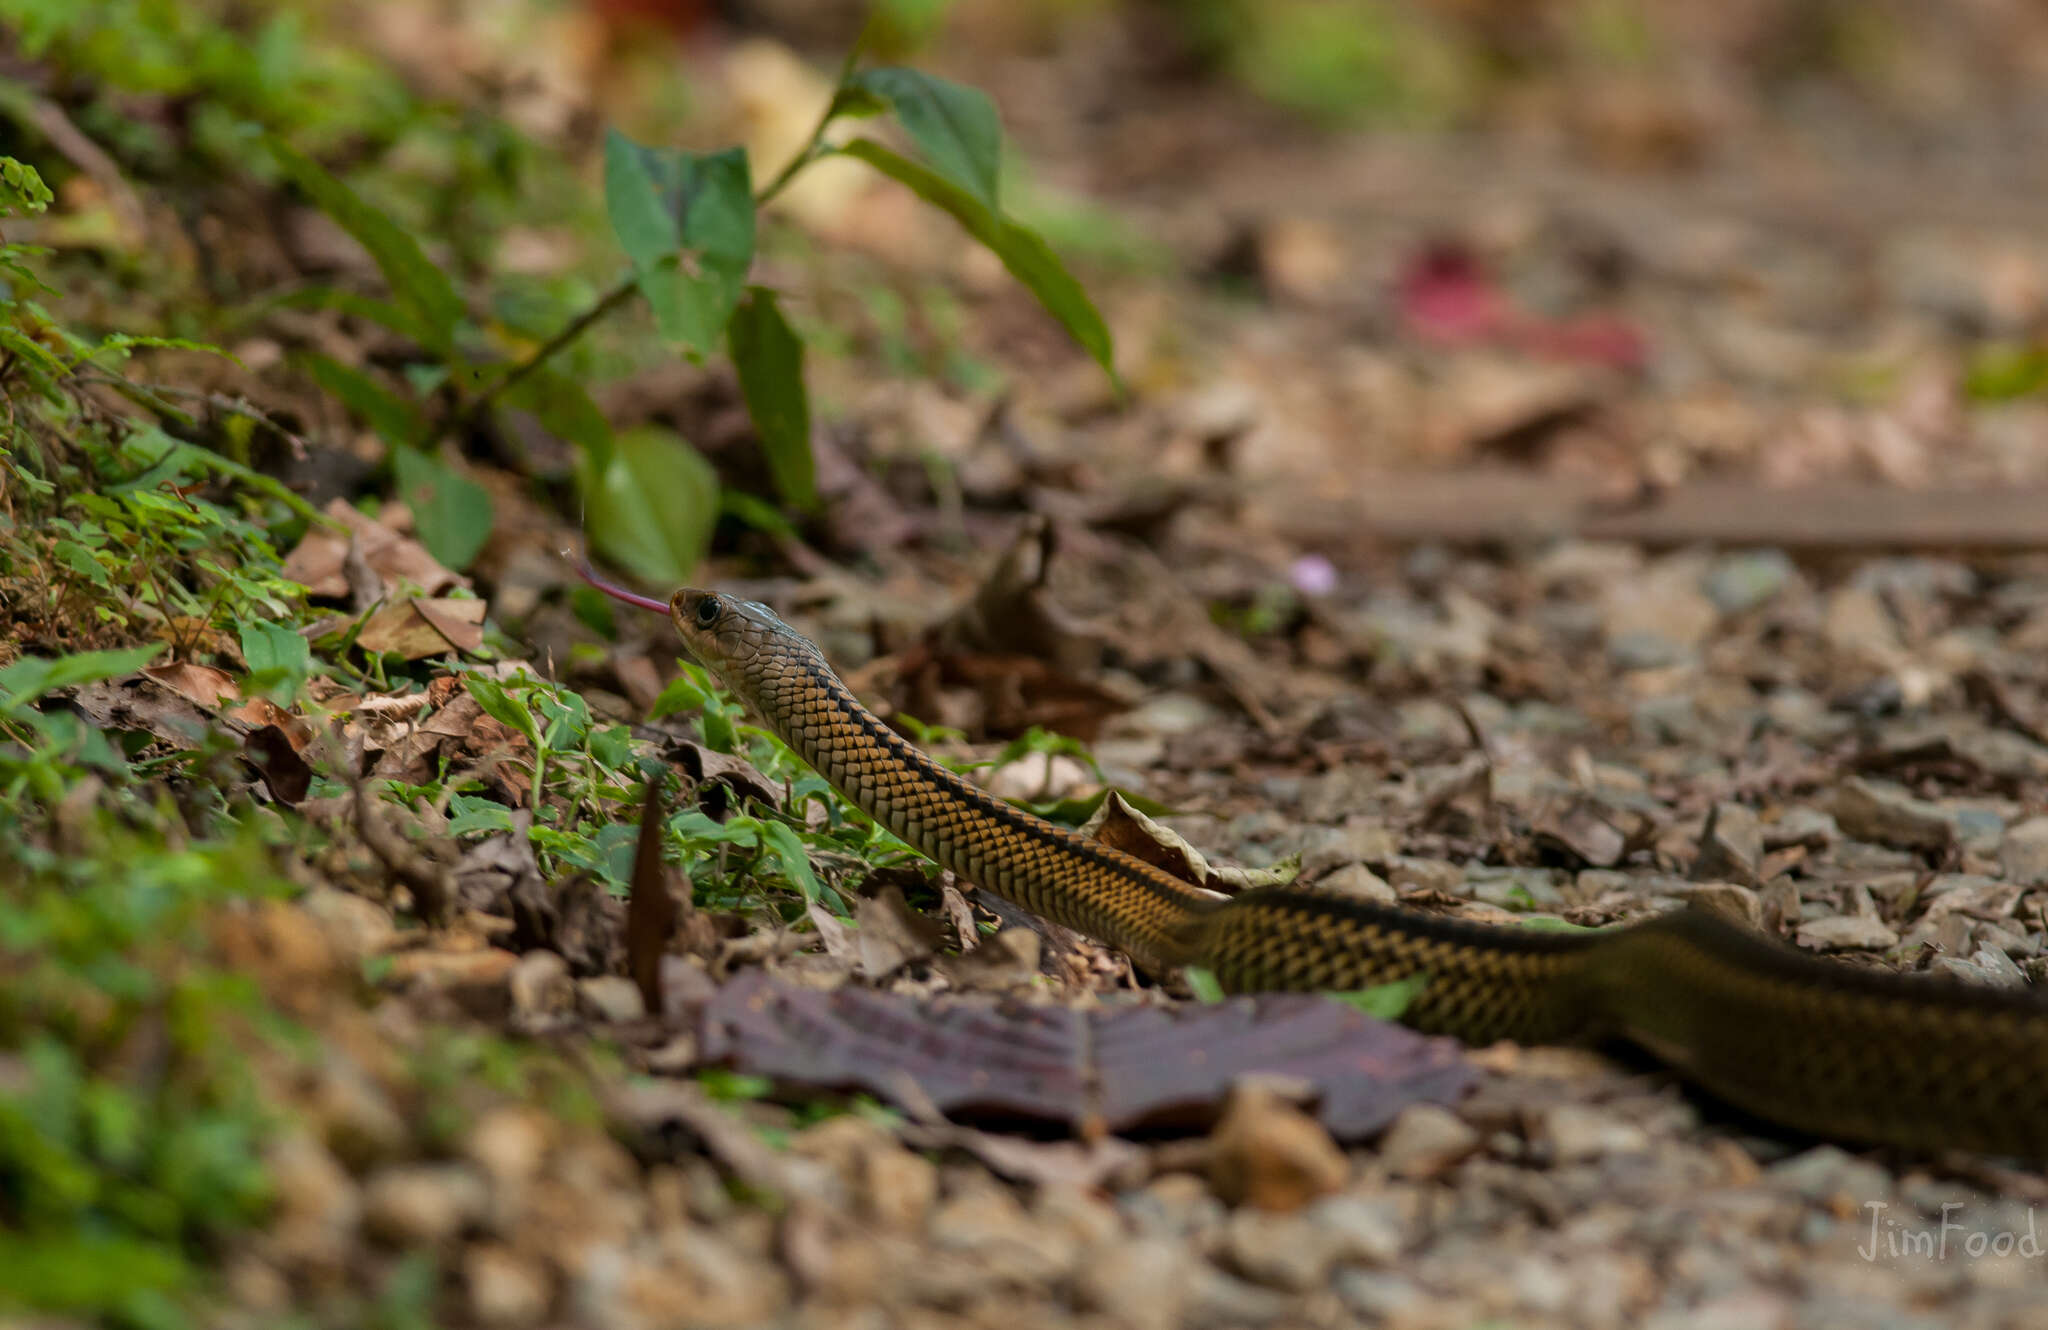 Image of Cantor's rat snake